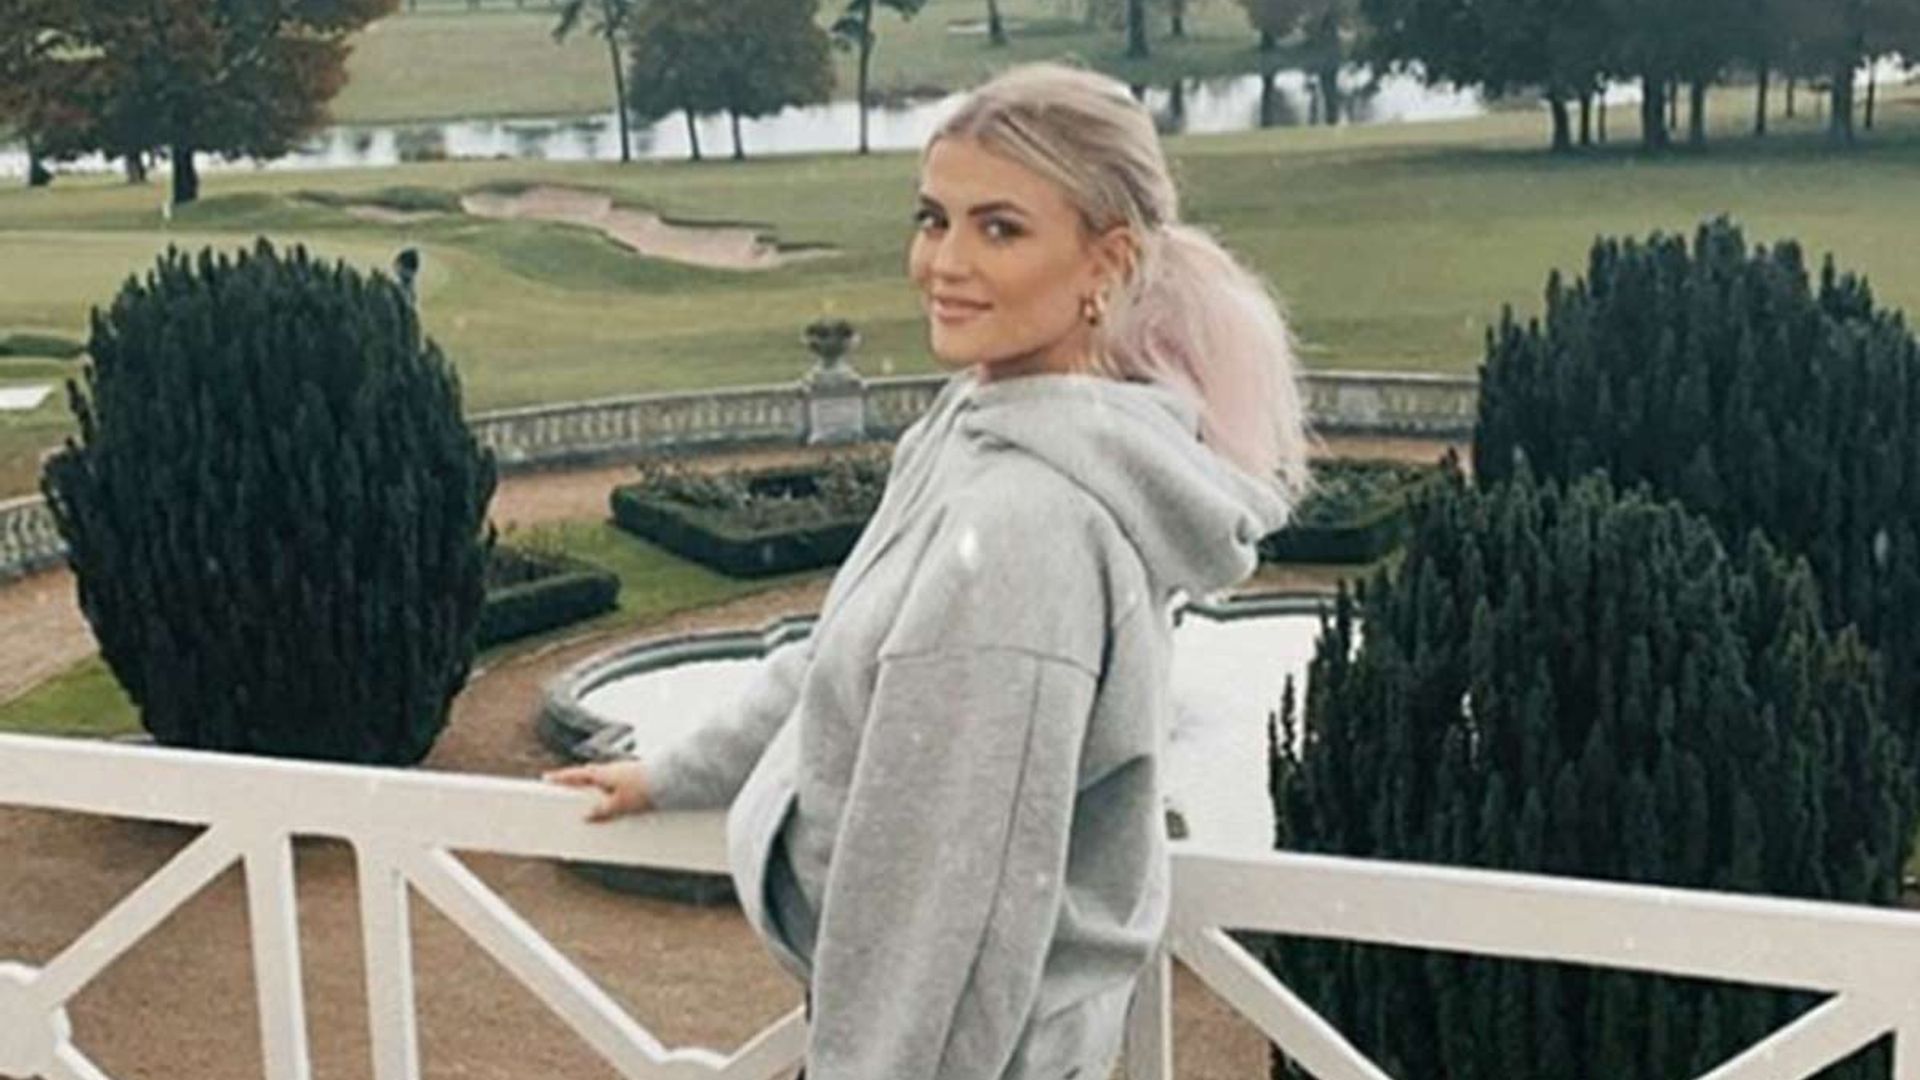 Coronation Street actress Lucy Fallon shows off her two beautiful Christmas trees